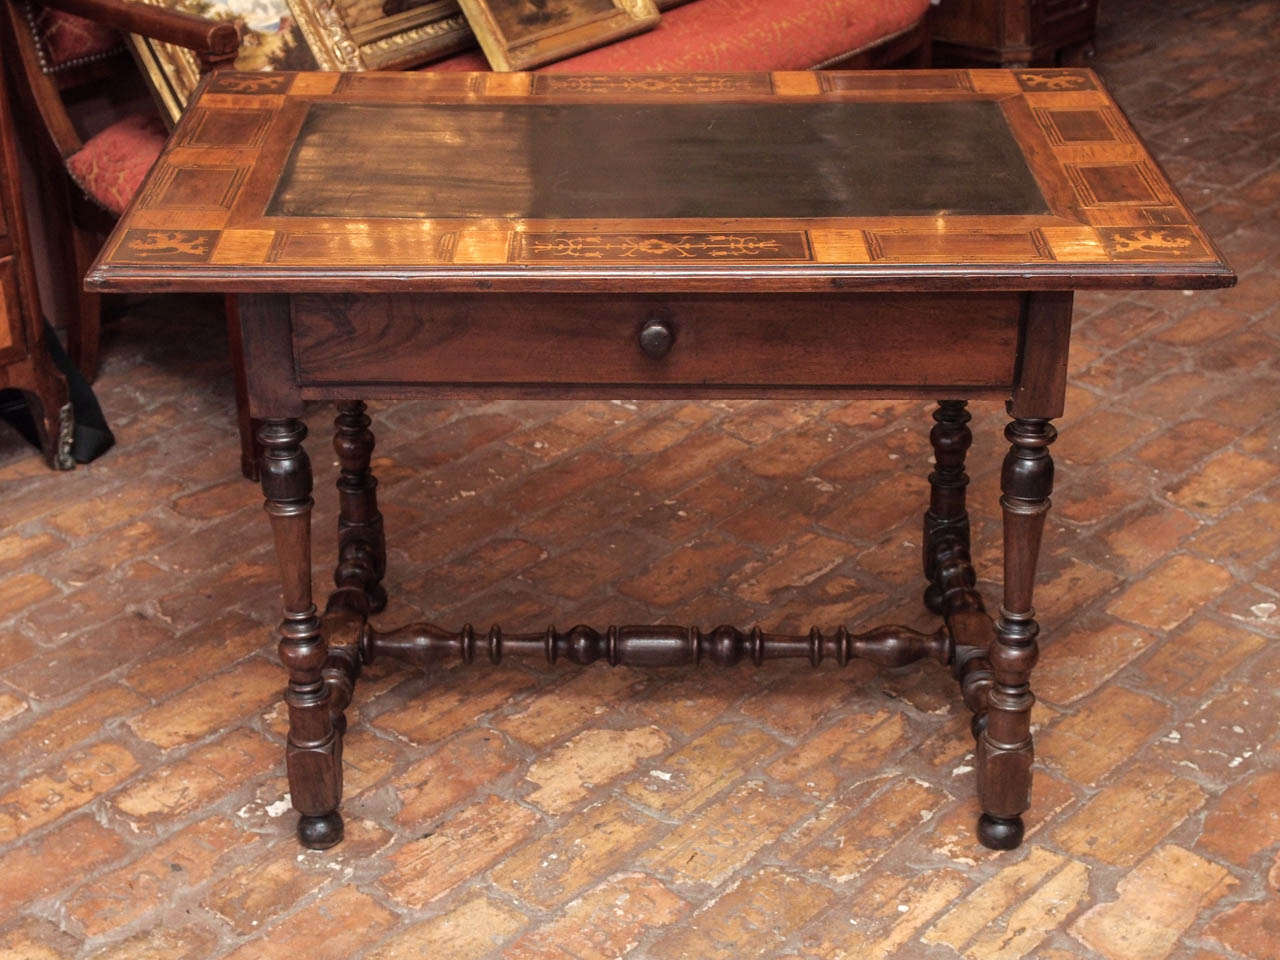 Late 17th century French marquetry table with lemon wood inlay, inset slate top, center drawer, and turned legs and stretcher, circa 1790.